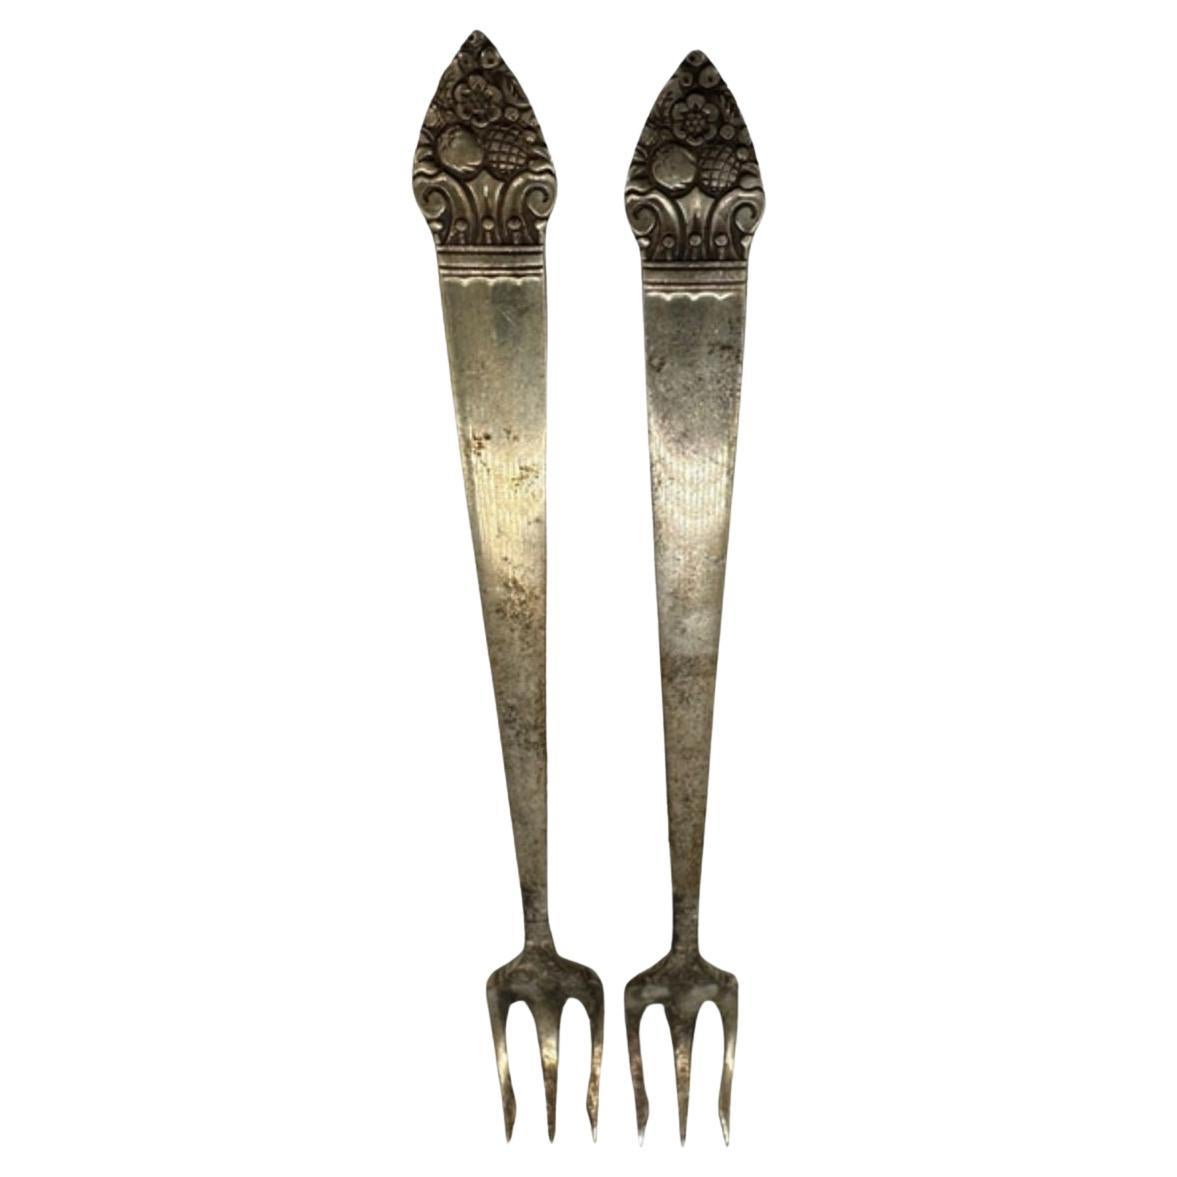 Pair of 1940's "King Cedric" Oneida Cocktail Oyster Seafood Forks